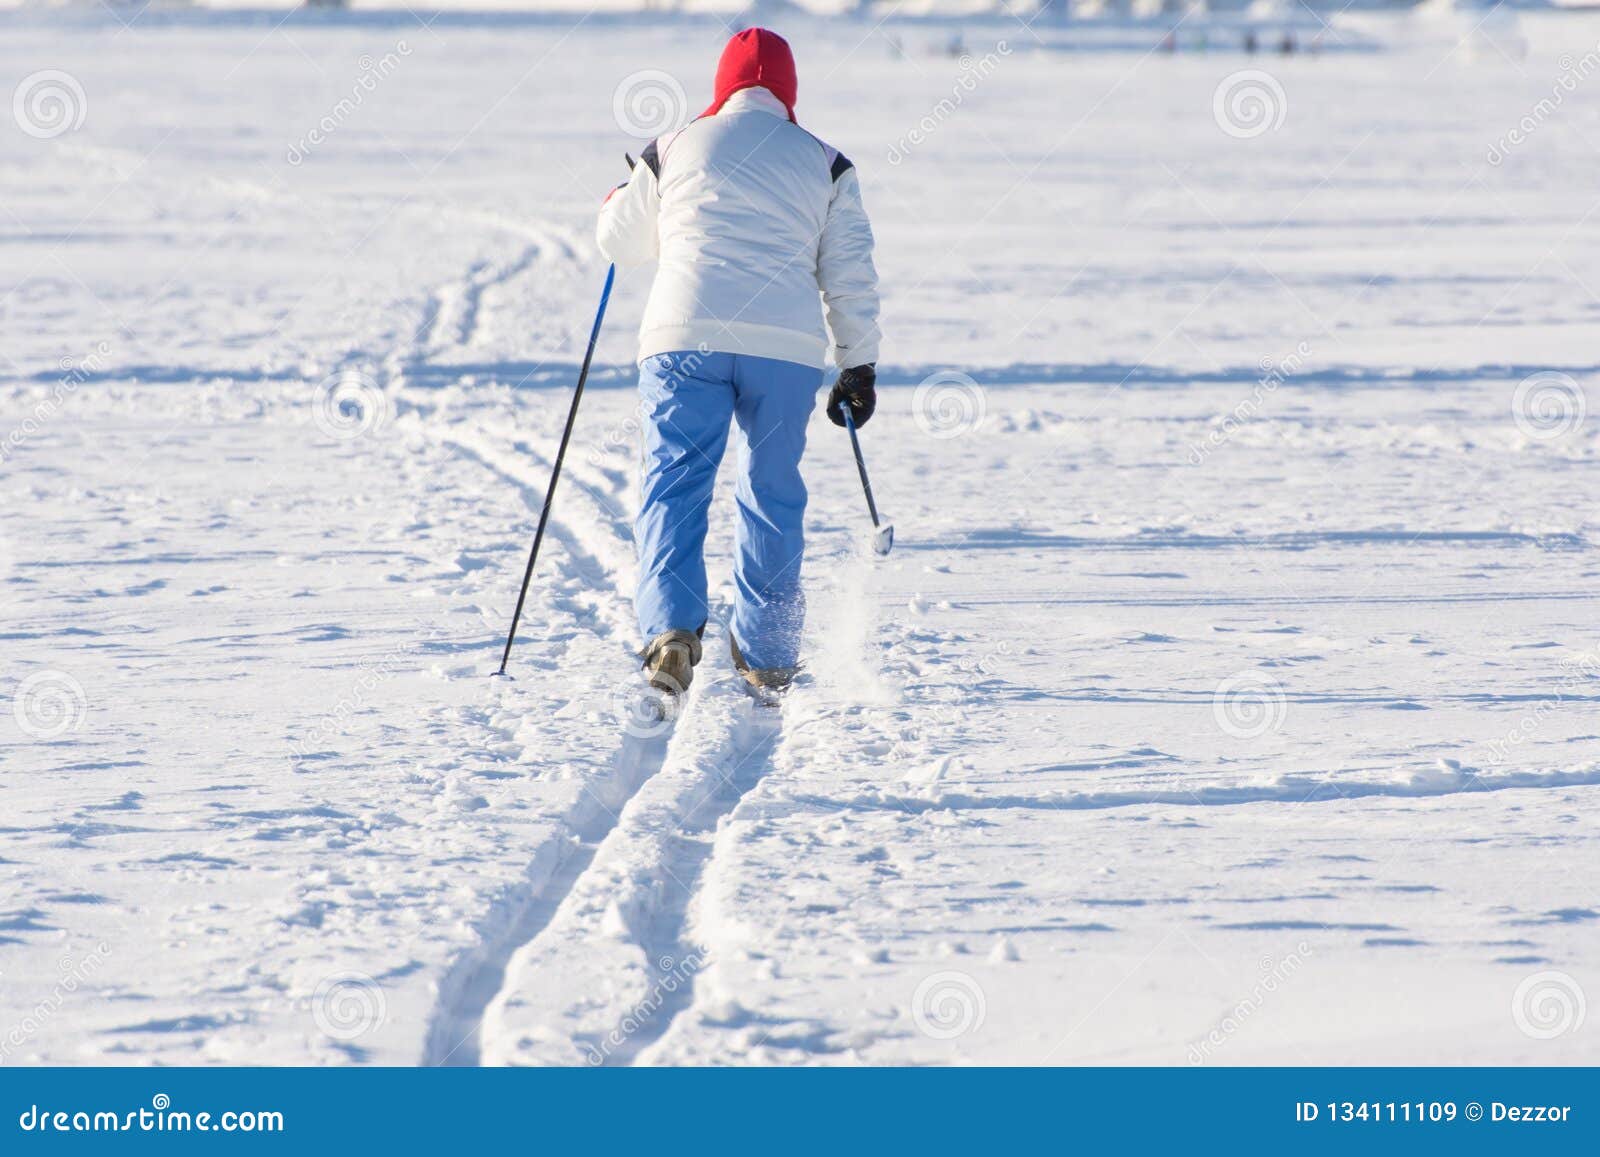 Skier Goes on the Track in the Plain on a Sunny Winter Day Stock Image ...